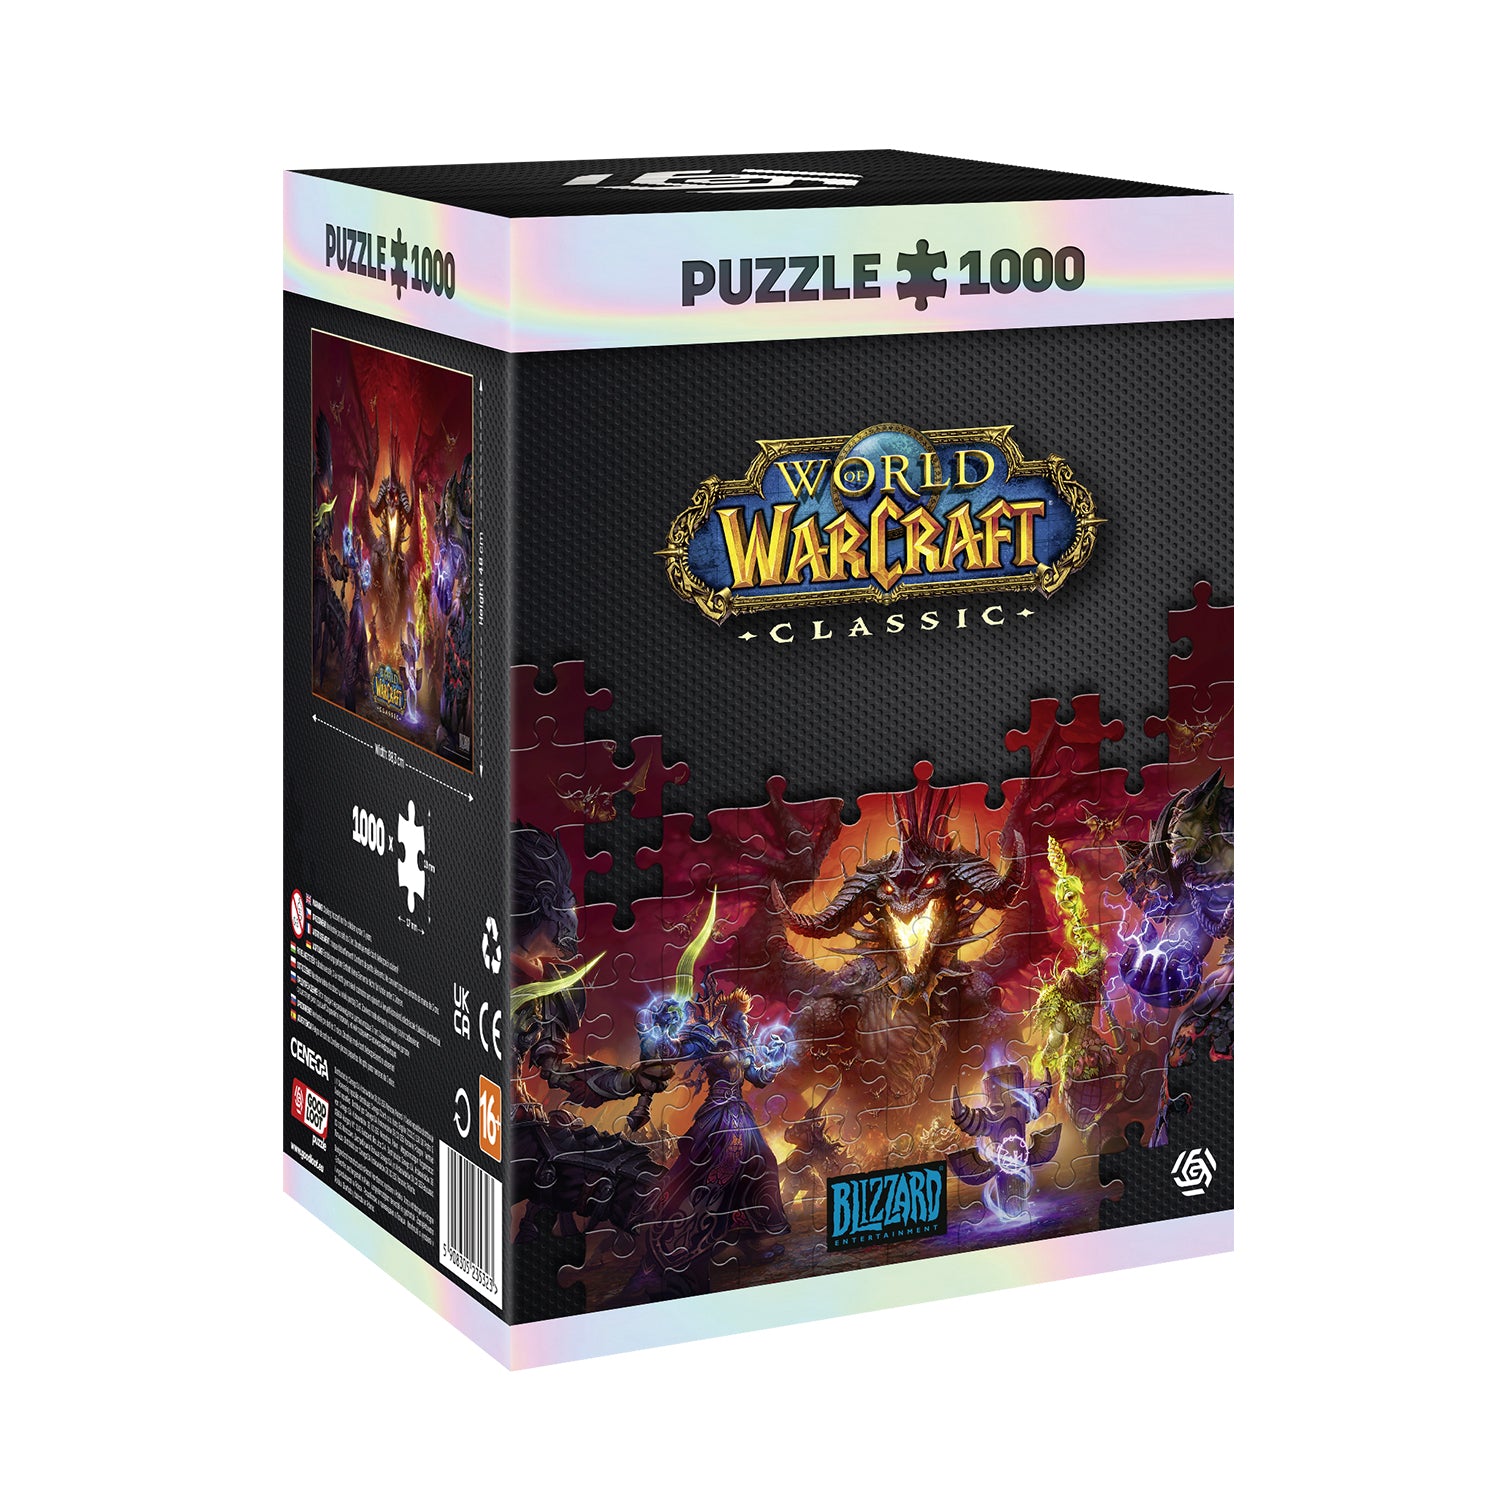 World of Warcraft: Classic Onyxia 1000 Piece Puzzle in Red - Box View